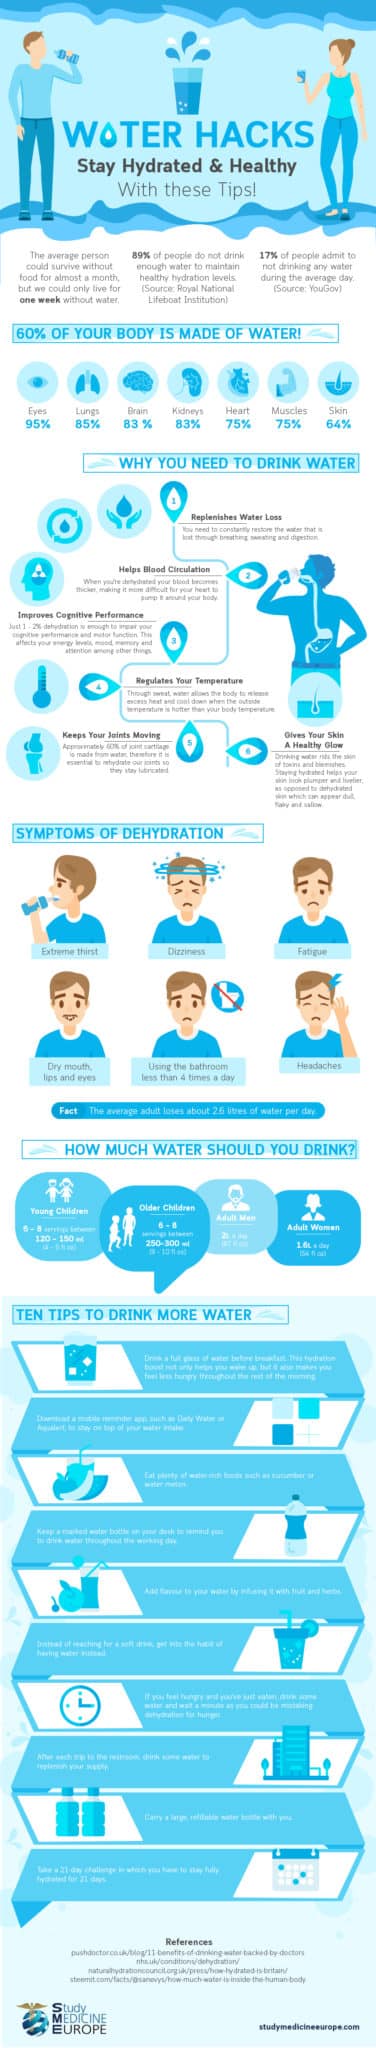 A chart of water hacks and information